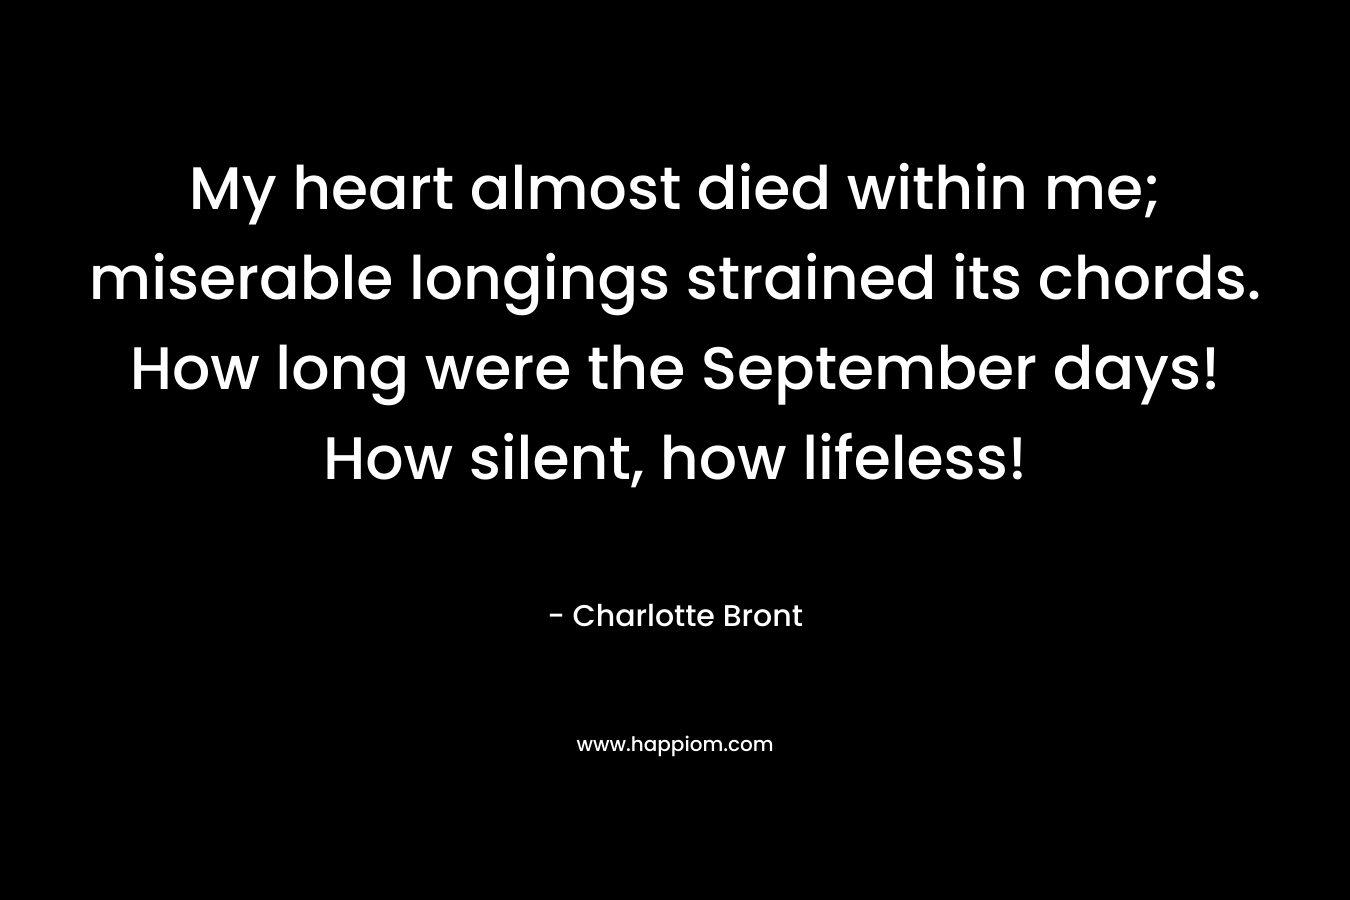 My heart almost died within me; miserable longings strained its chords. How long were the September days! How silent, how lifeless!